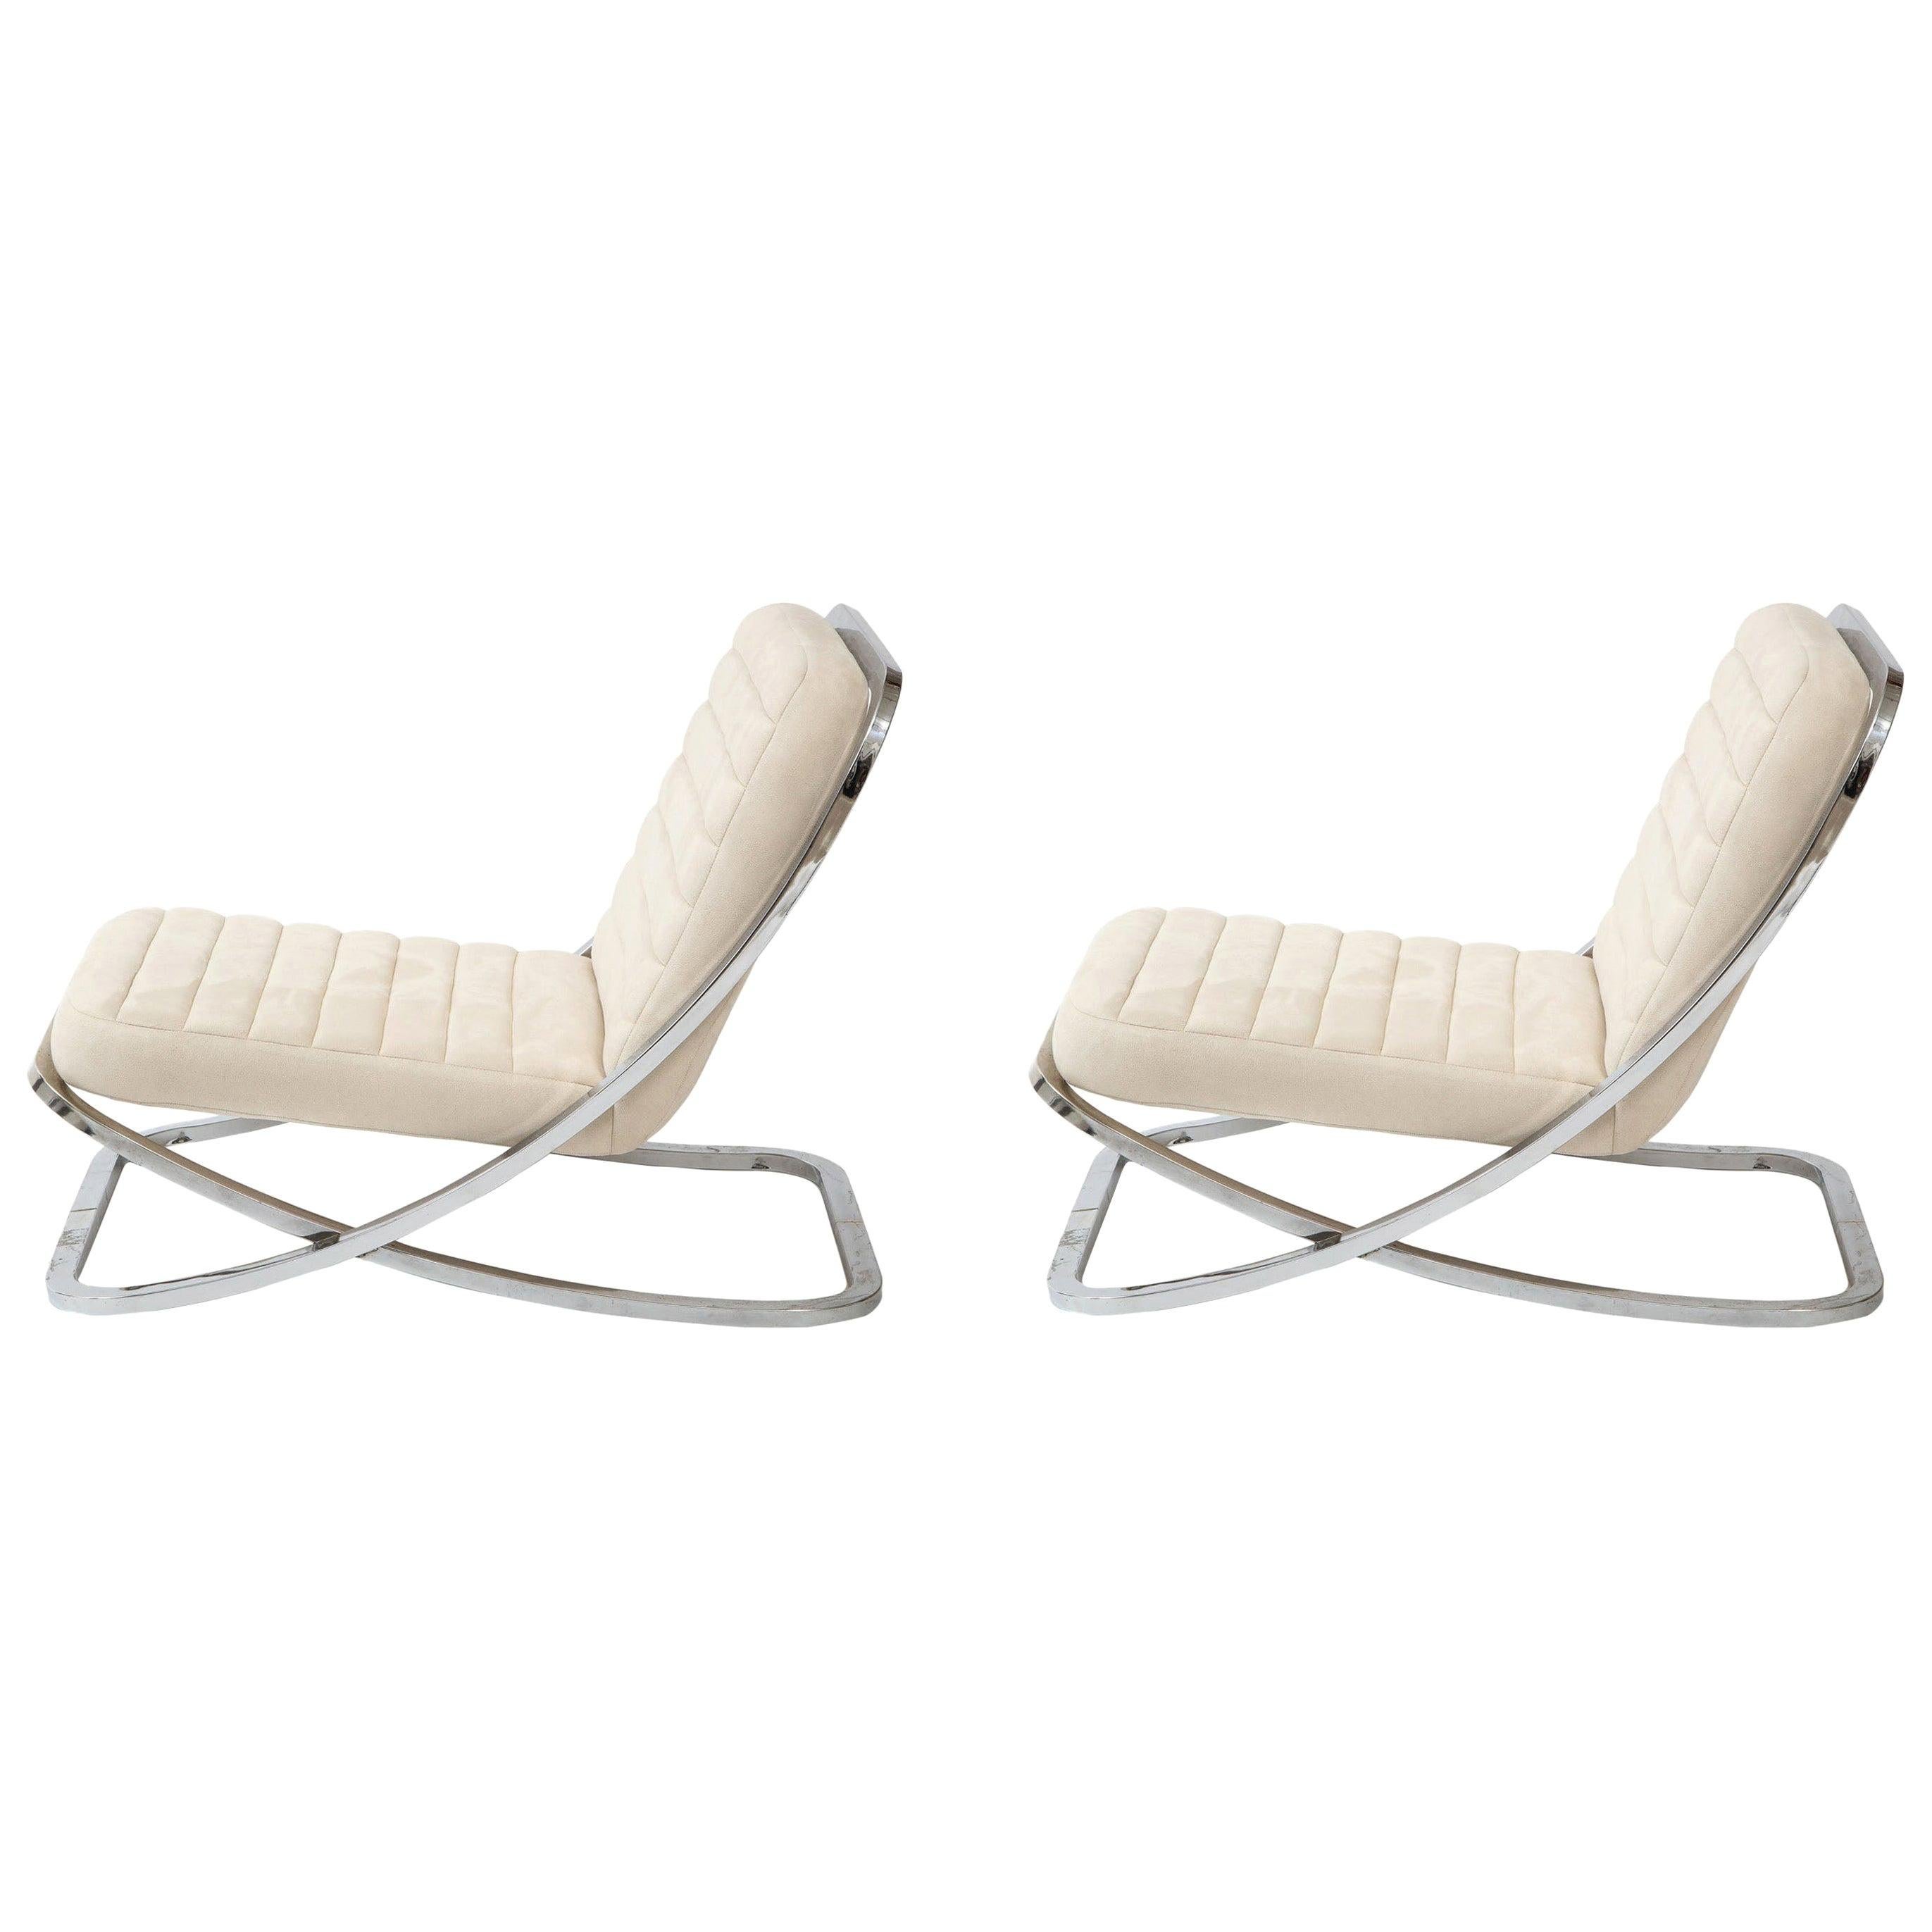 Pair of Low White Ultra Suede and Polished Chrome Lounge Chairs, 1970s, France For Sale